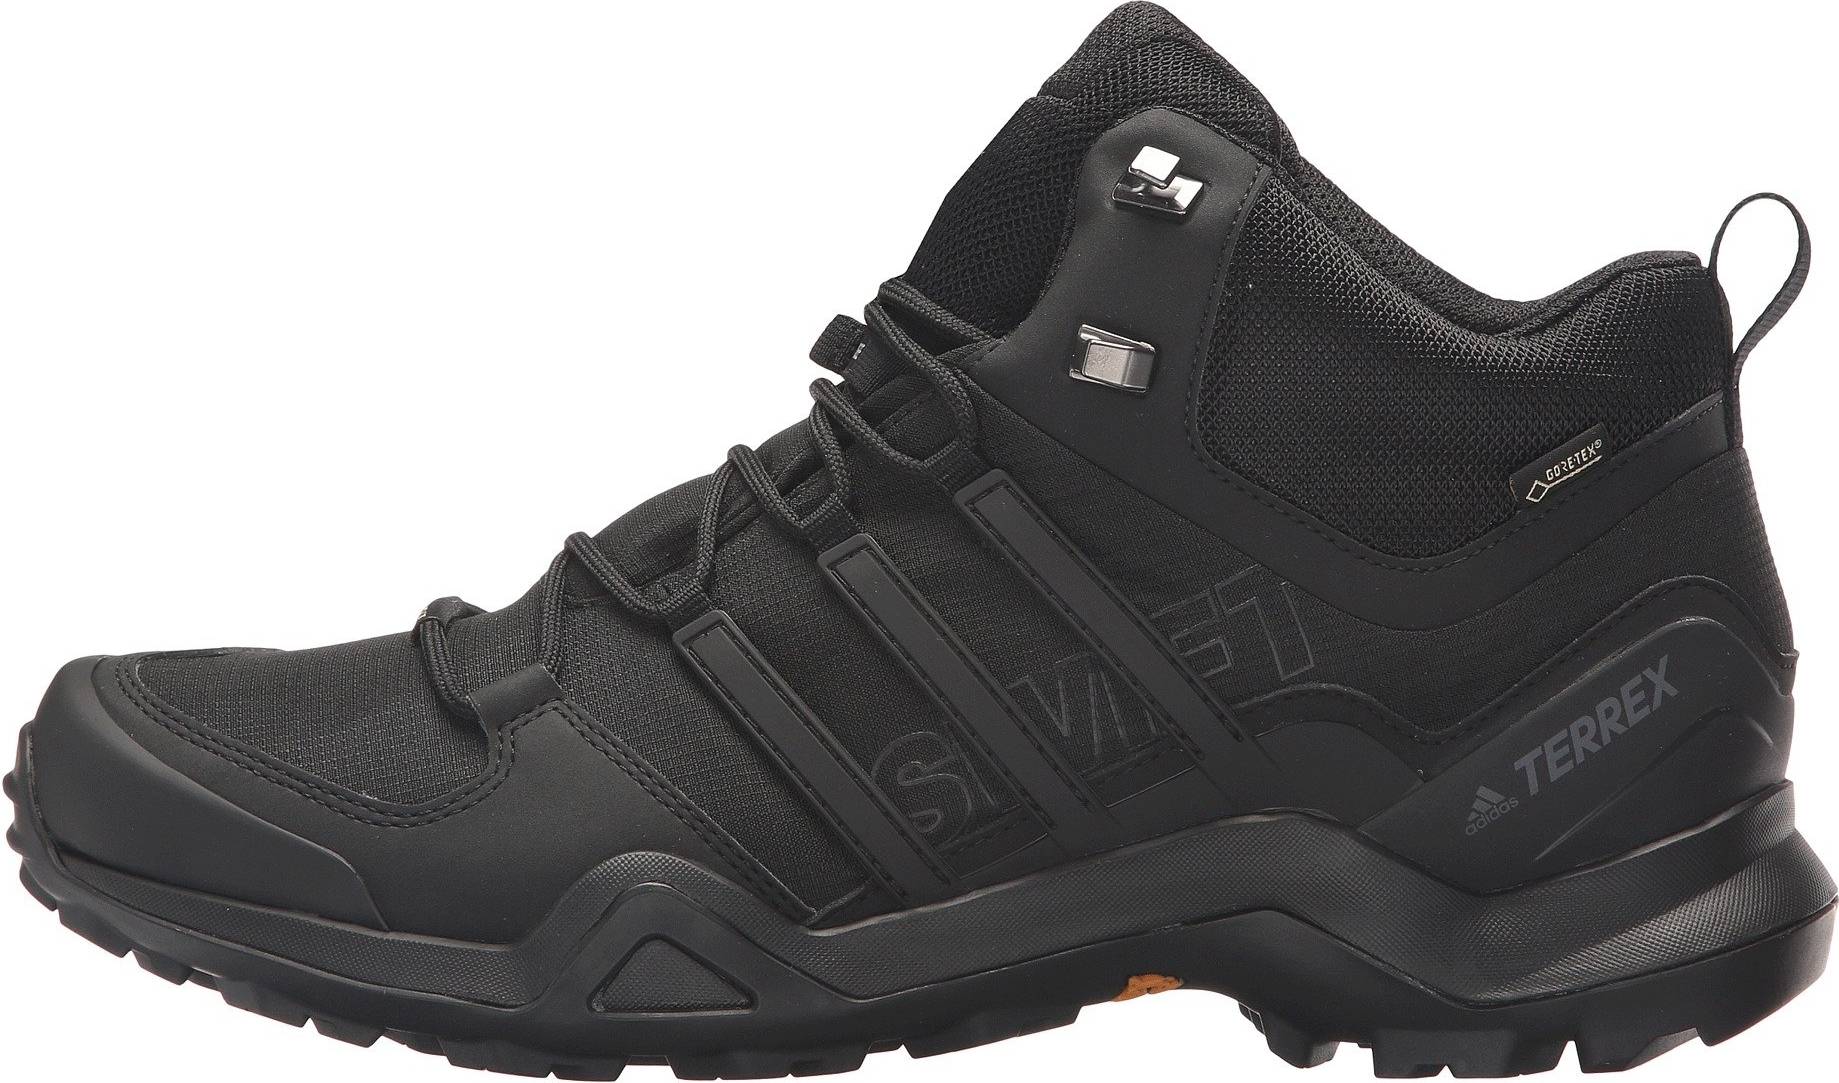 Auckland overvældende smugling Adidas Terrex Swift R2 Mid GTX Review, Facts, Comparison | RunRepeat